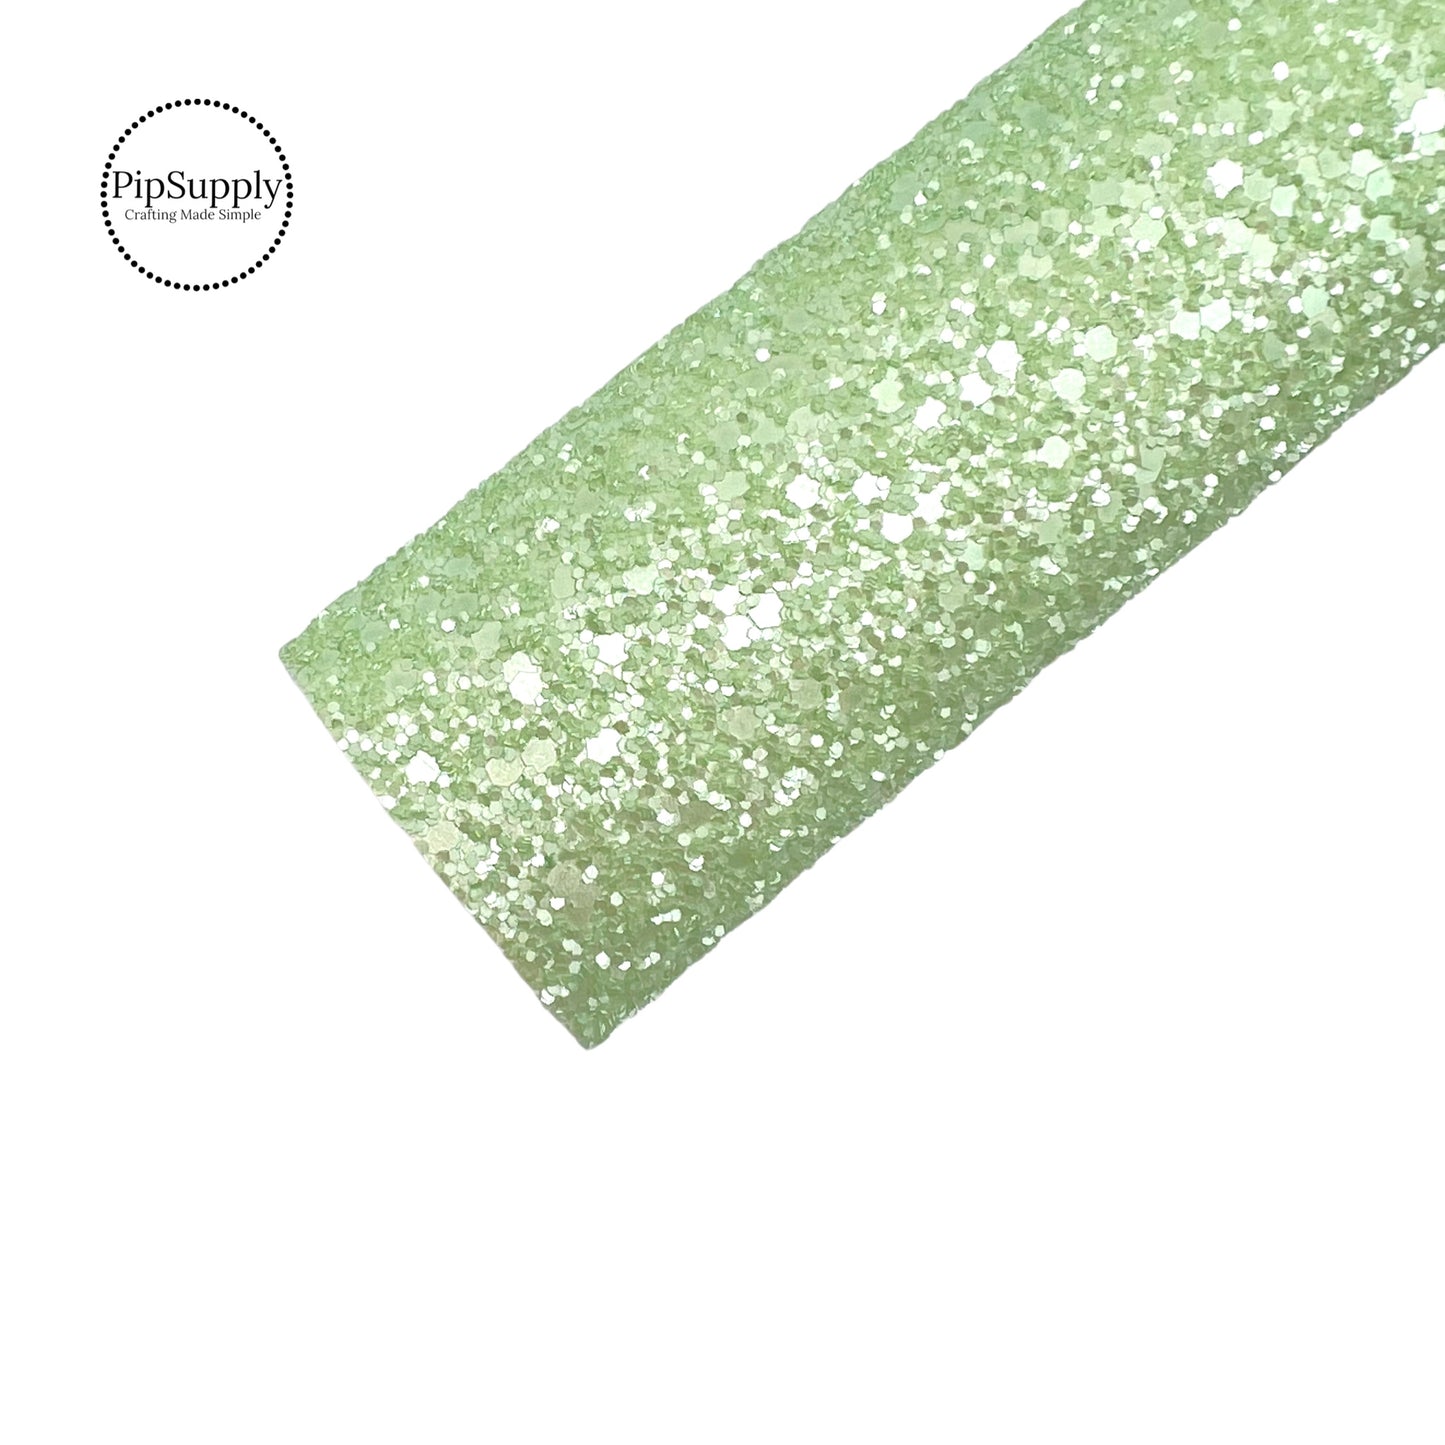 Solid green frosted pastel chunky glitter sheet